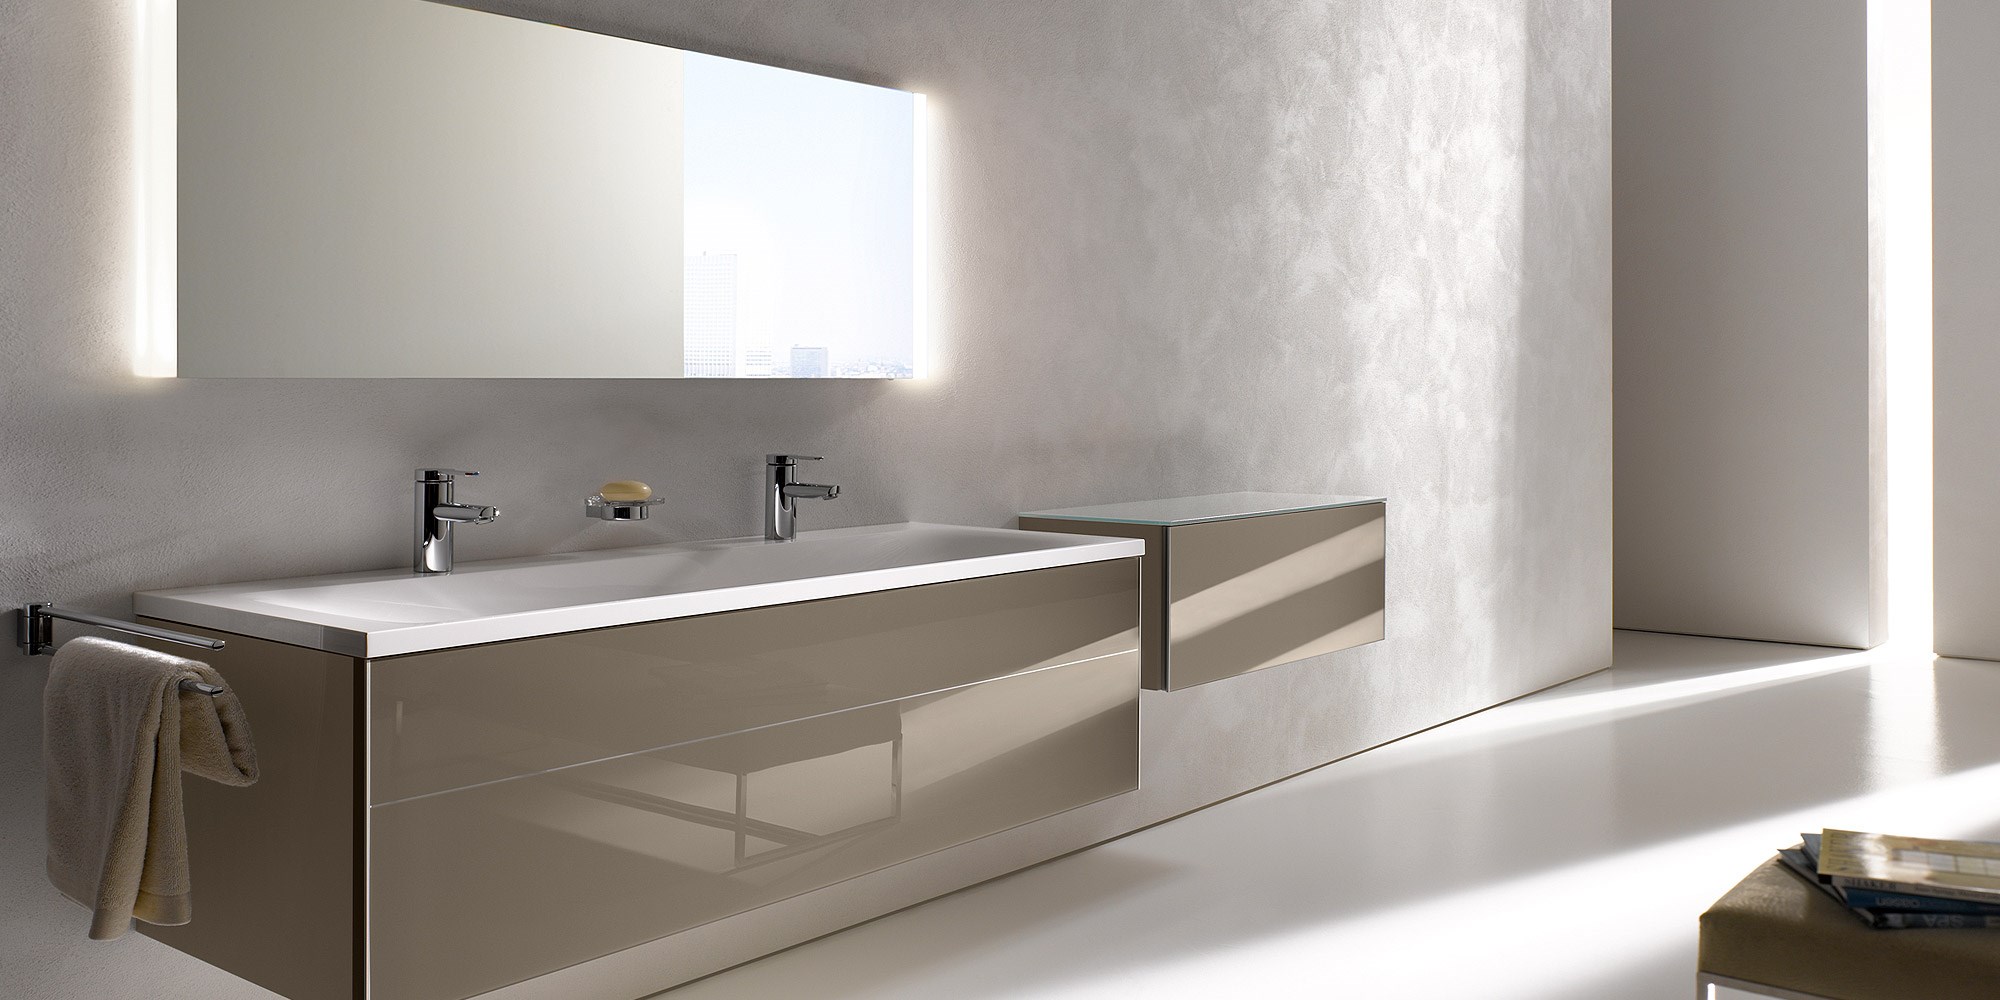 BATHROOMS BY KEUCO from Channel Island Ceramics